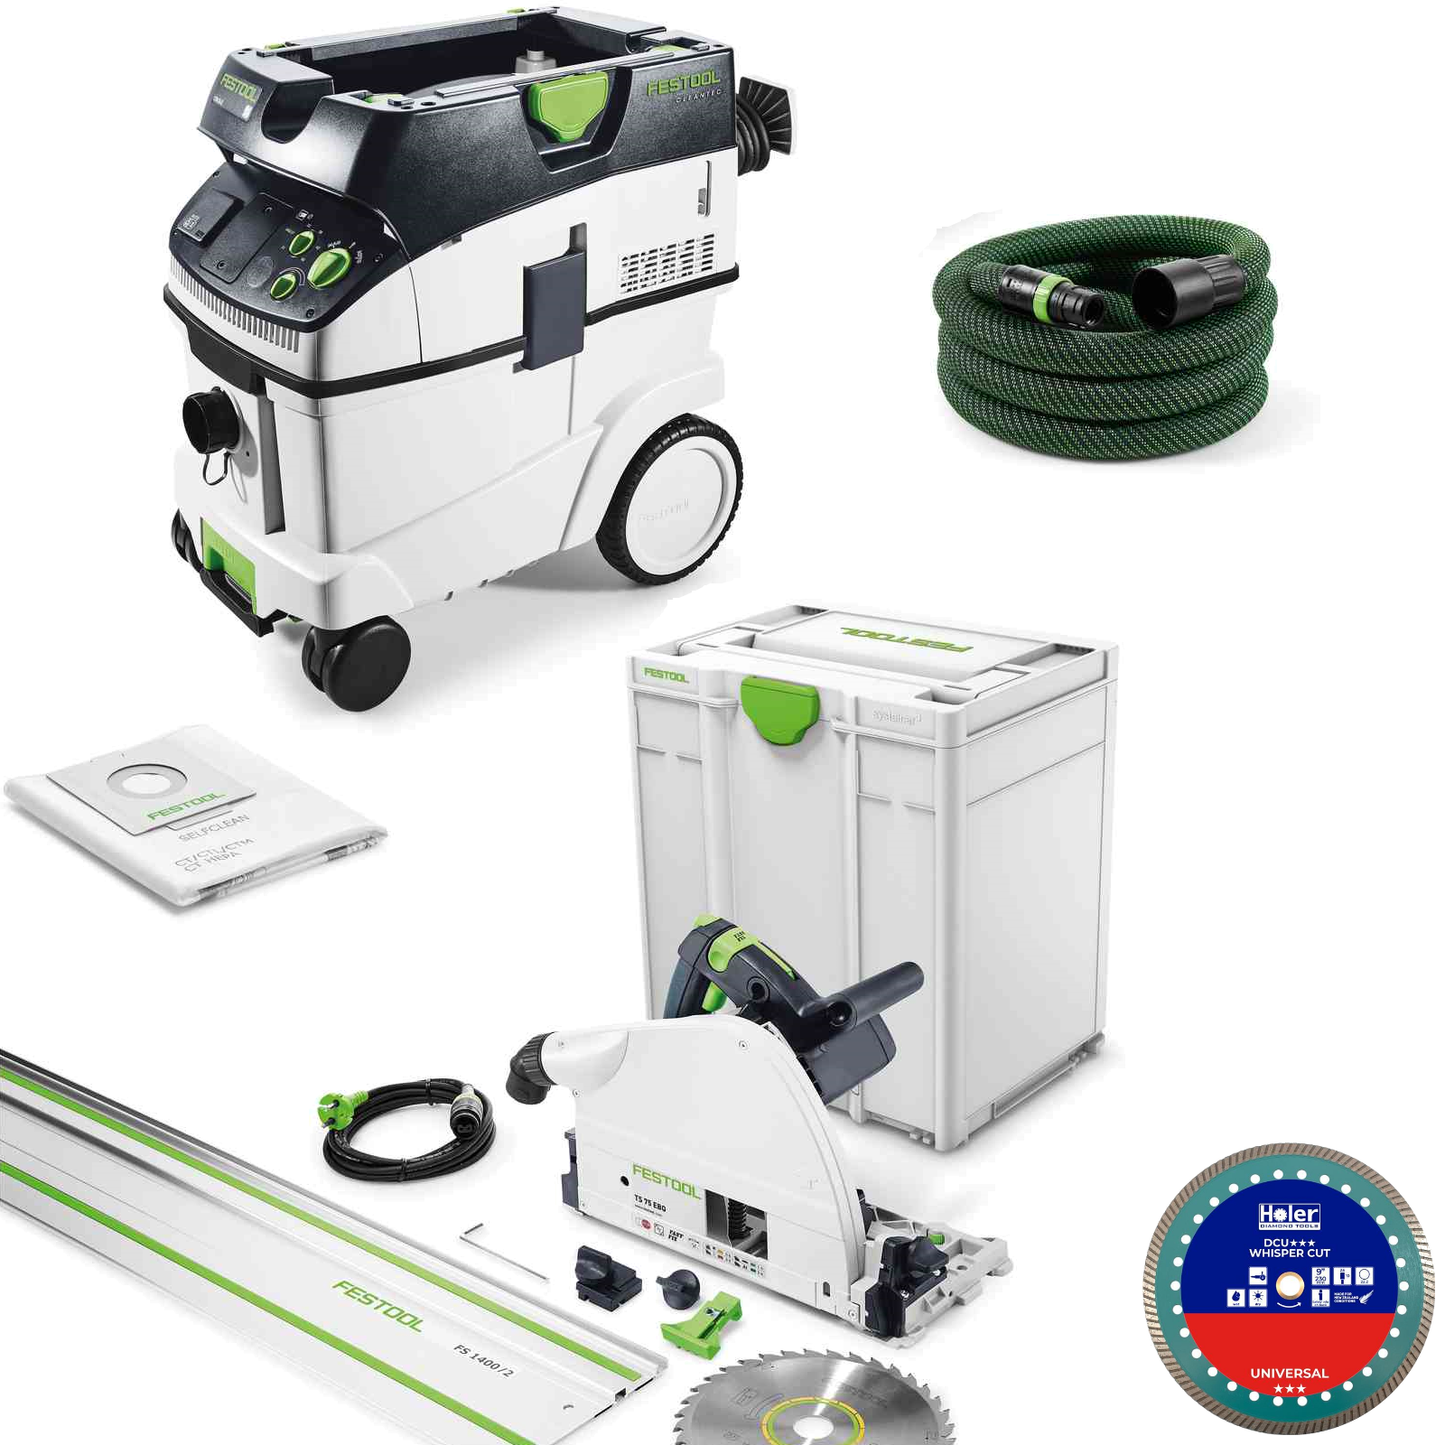 Festool Autoclaved Aerated Concrete (AAC / Hebel) Plunge Cutting Kit 70mm Max Depth